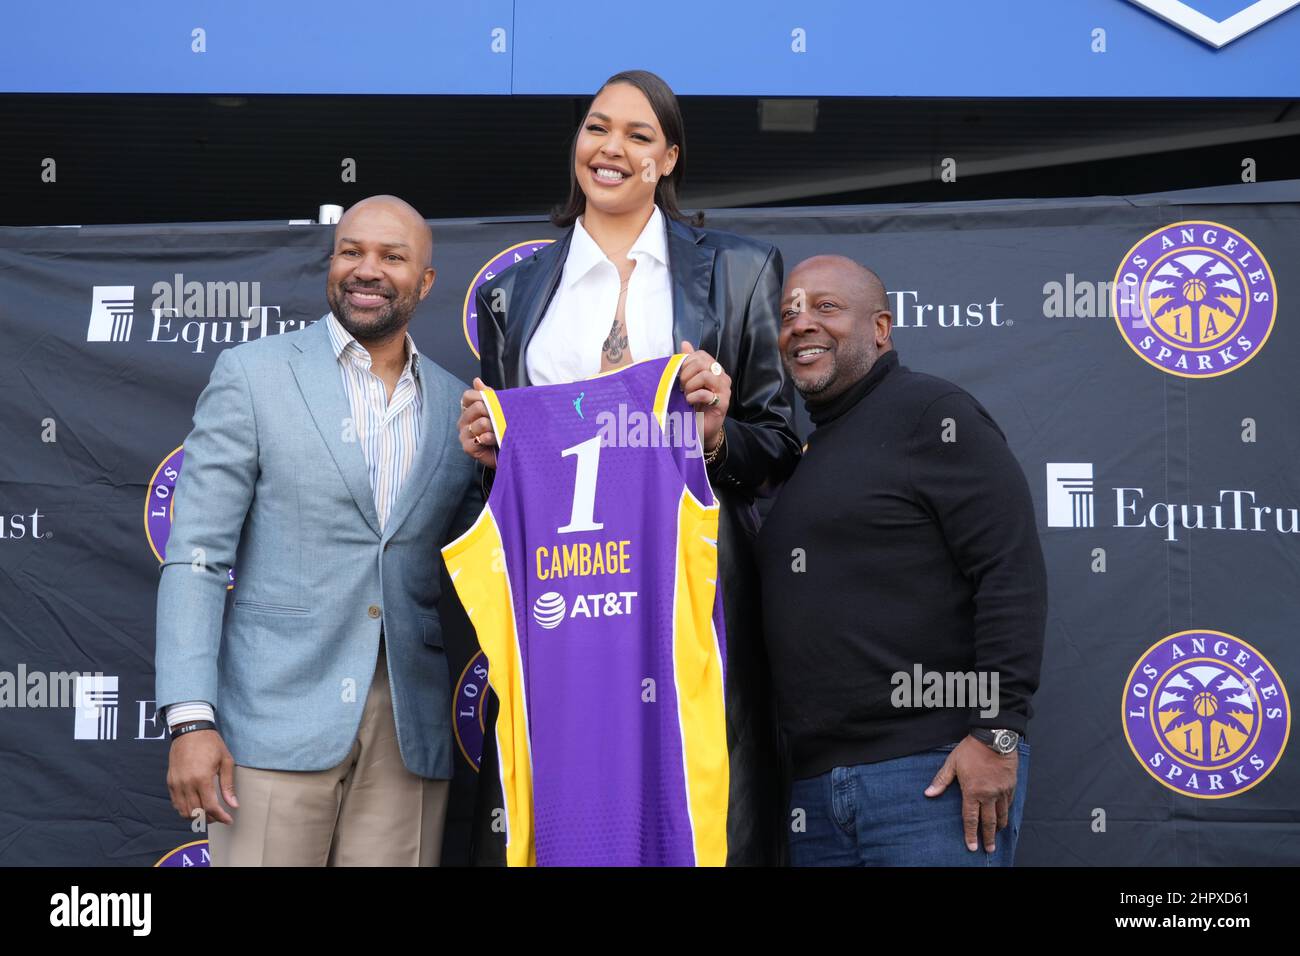 WNBA's worst performance of 2022: Liz Cambage and Derek Fisher's L.A. exit  - The Athletic